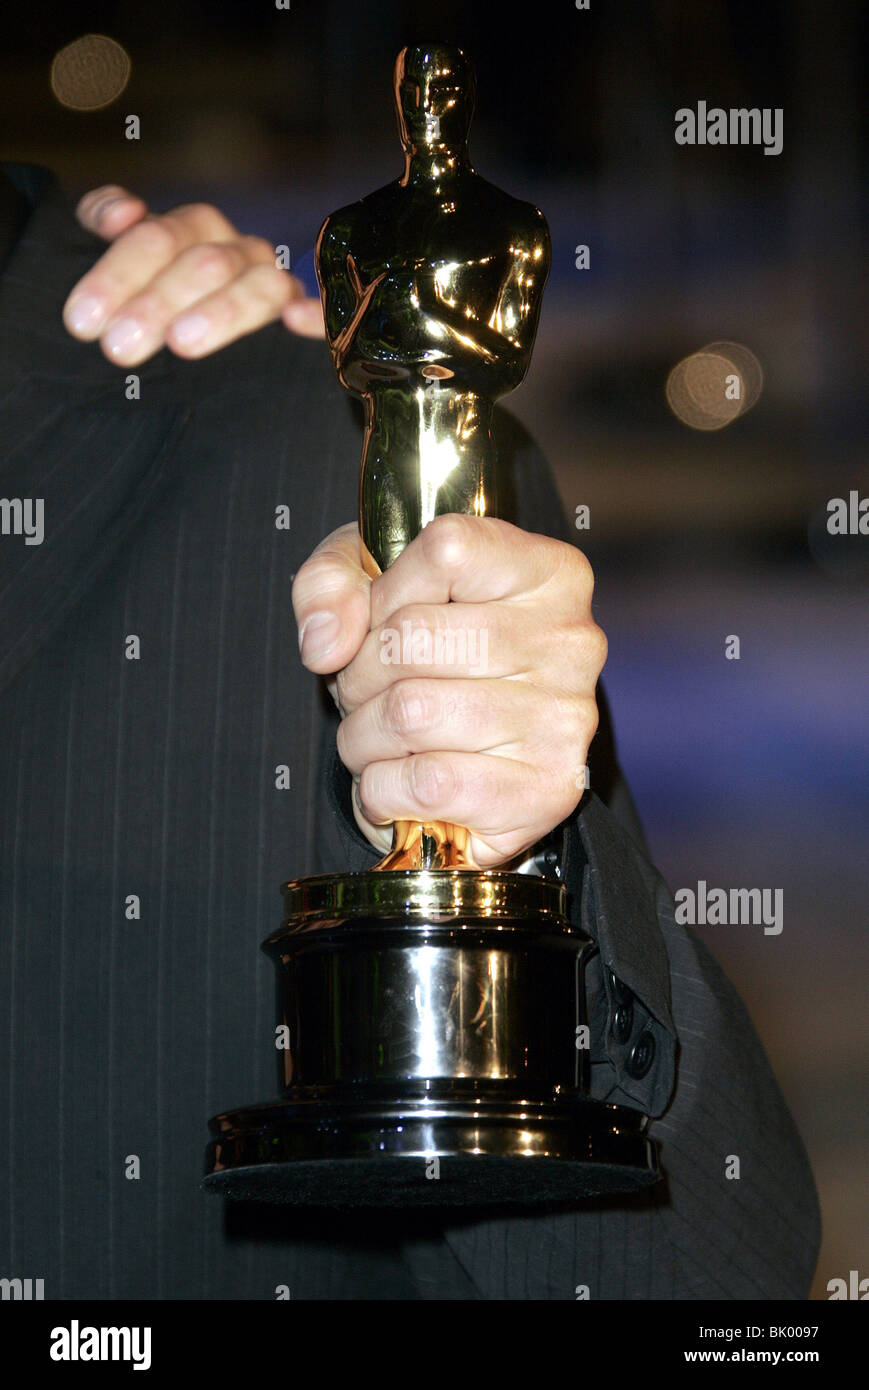 What is the Oscar statuette holding in its hands?